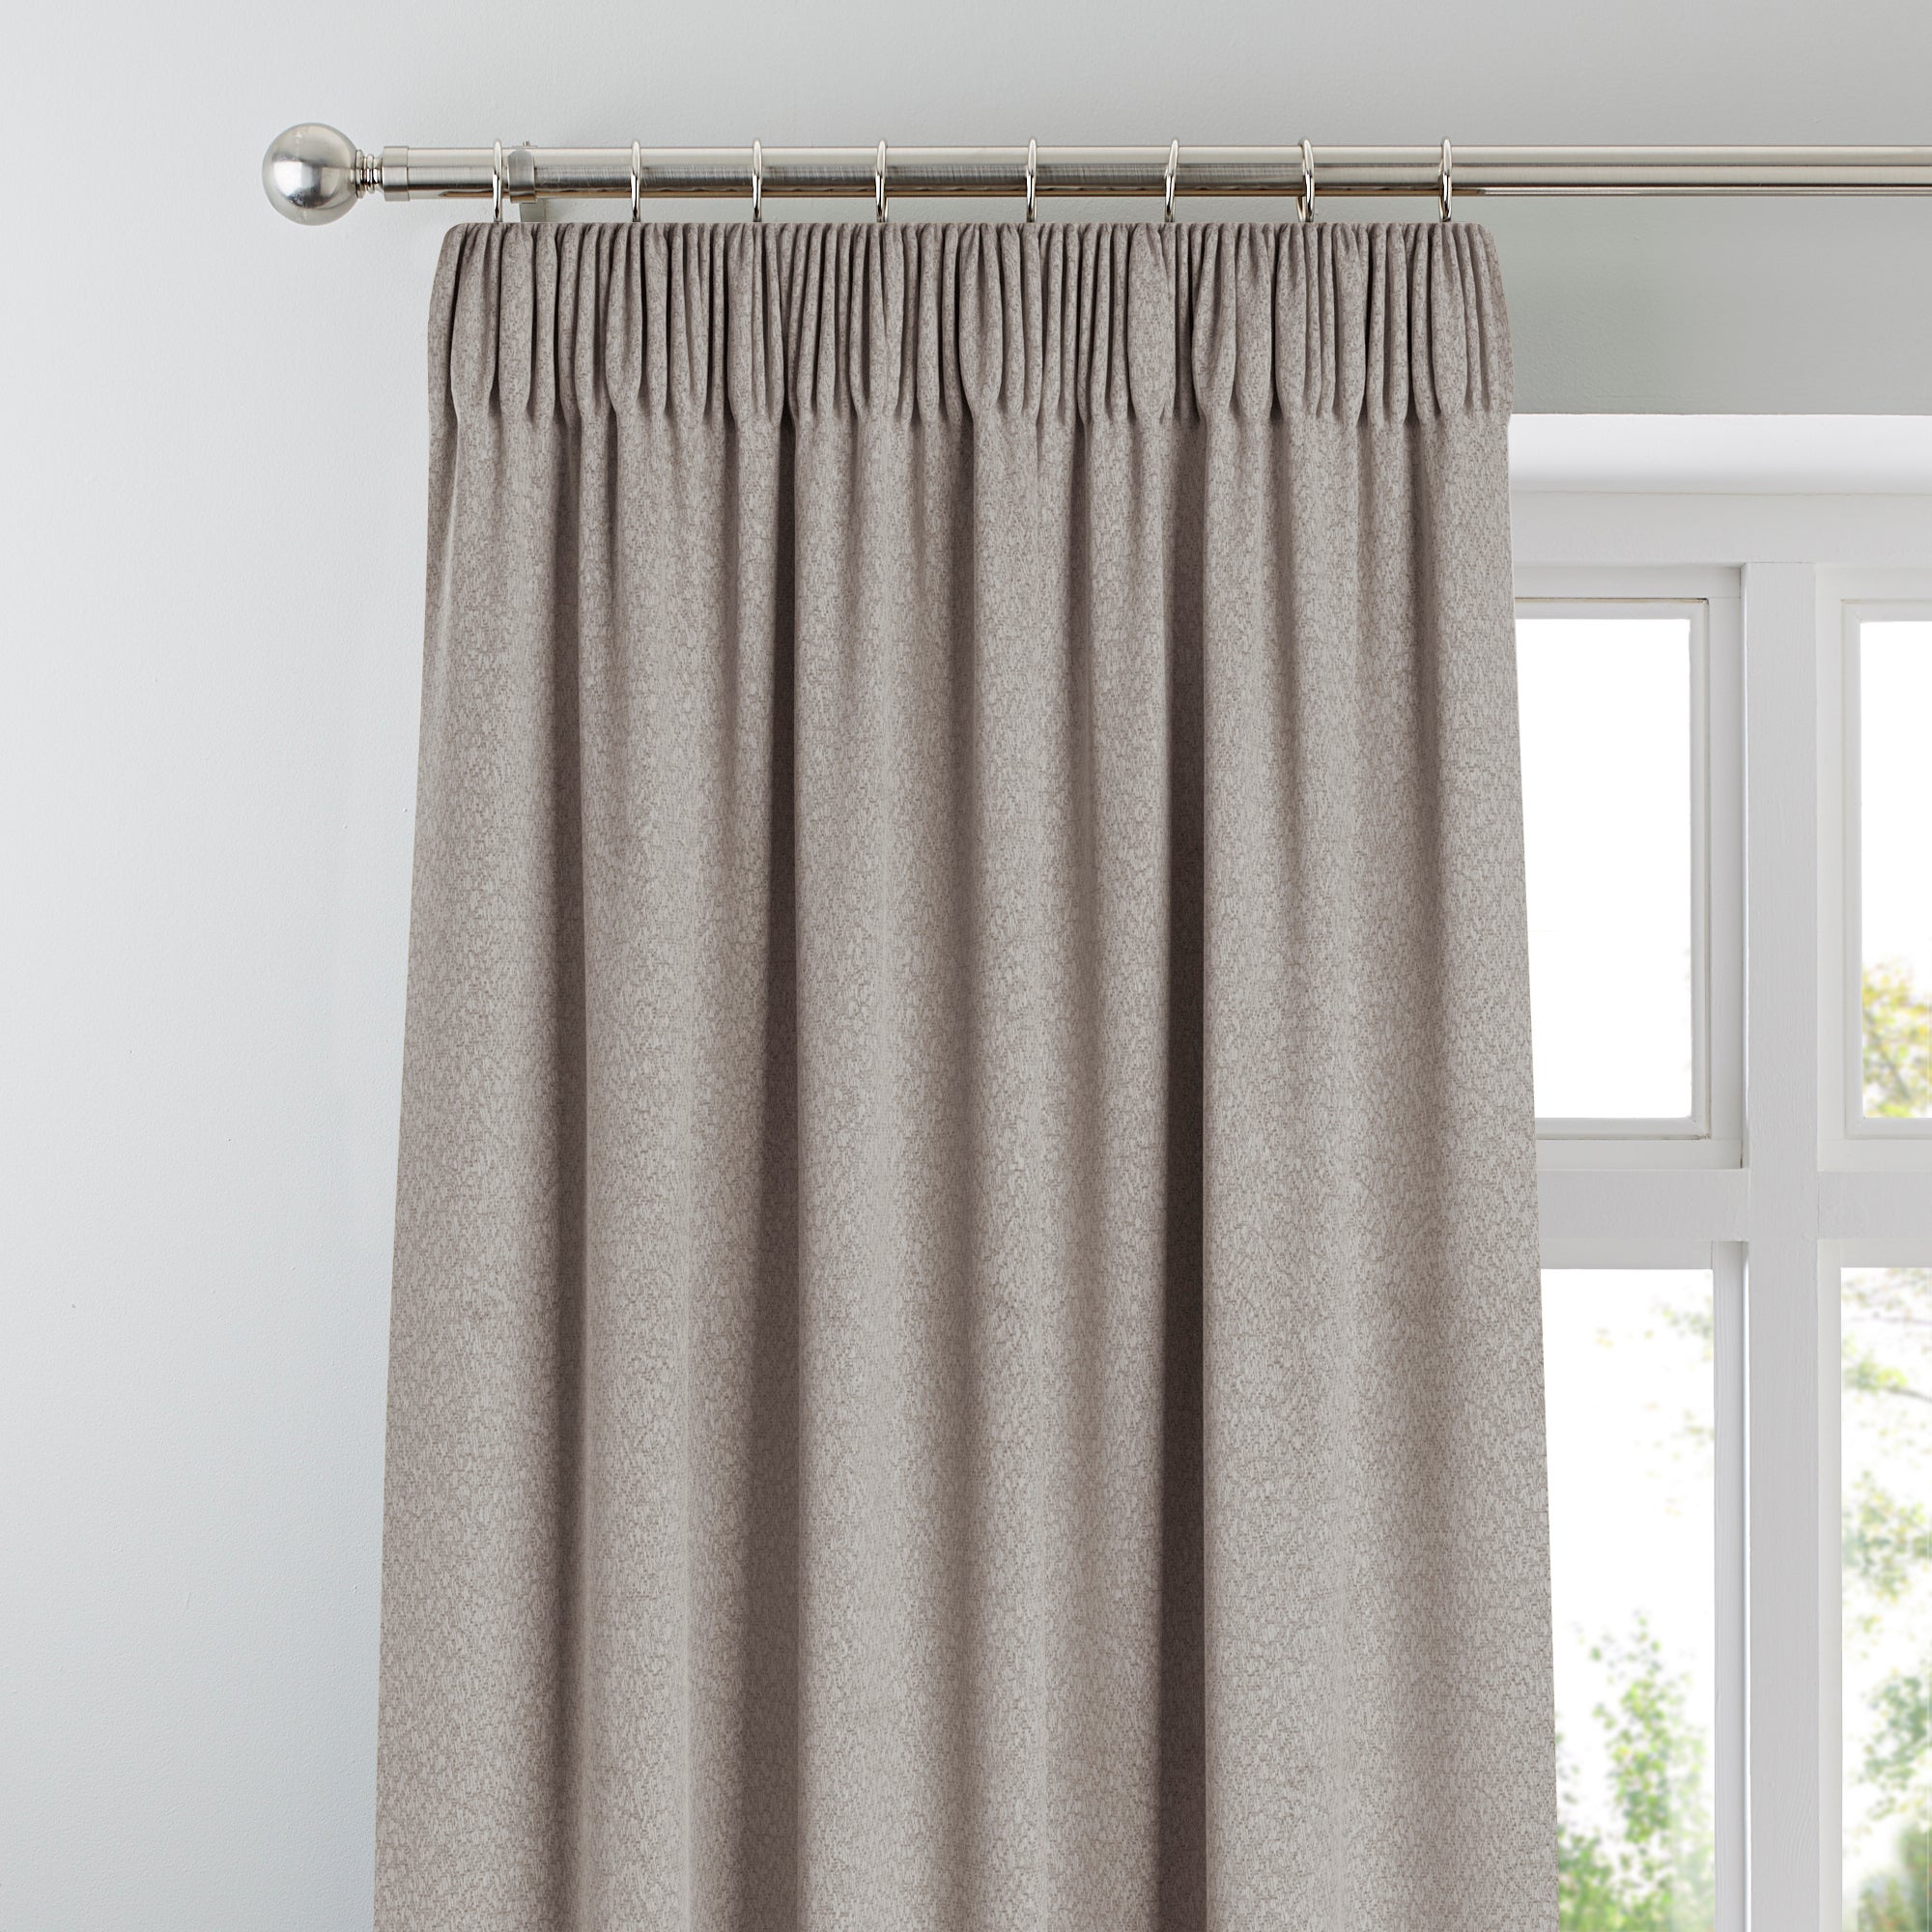 All Ready Made Curtains | Dunelm | Page 11